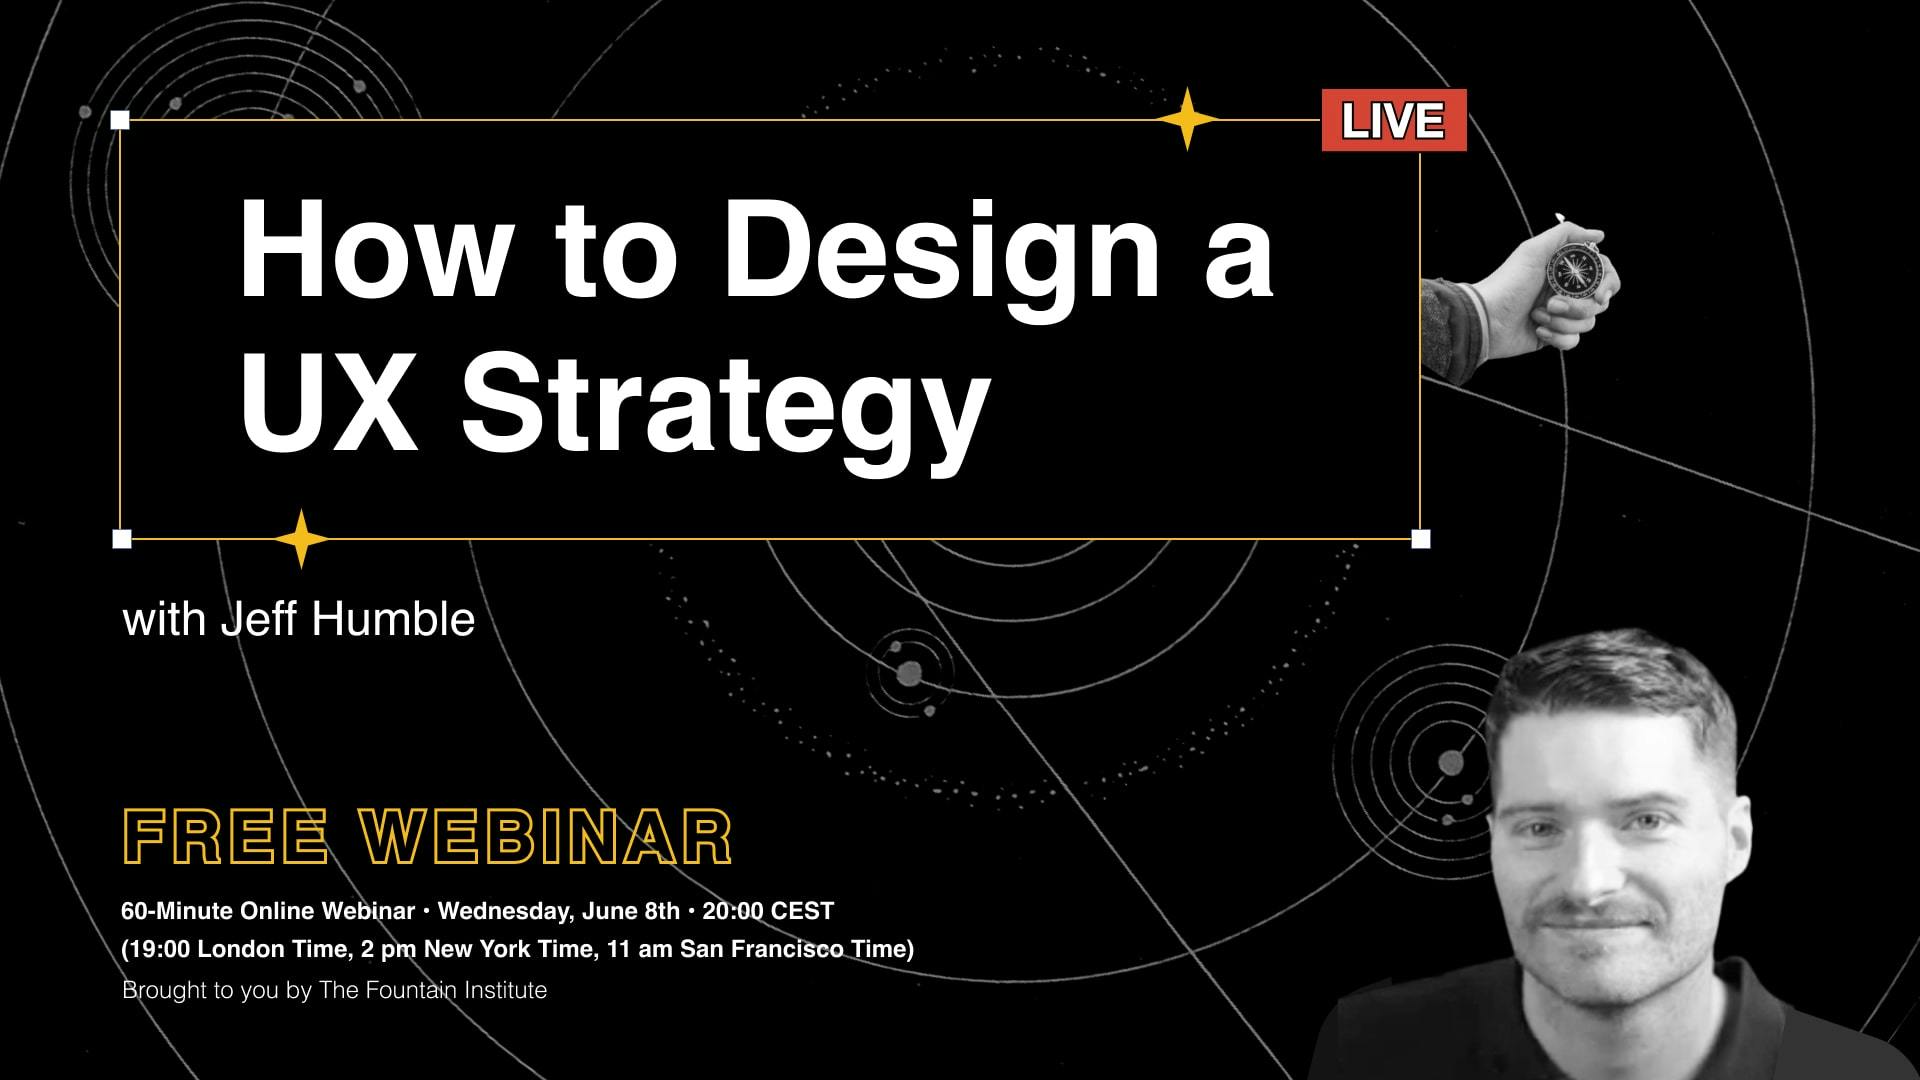 How to Design a UX Strategy